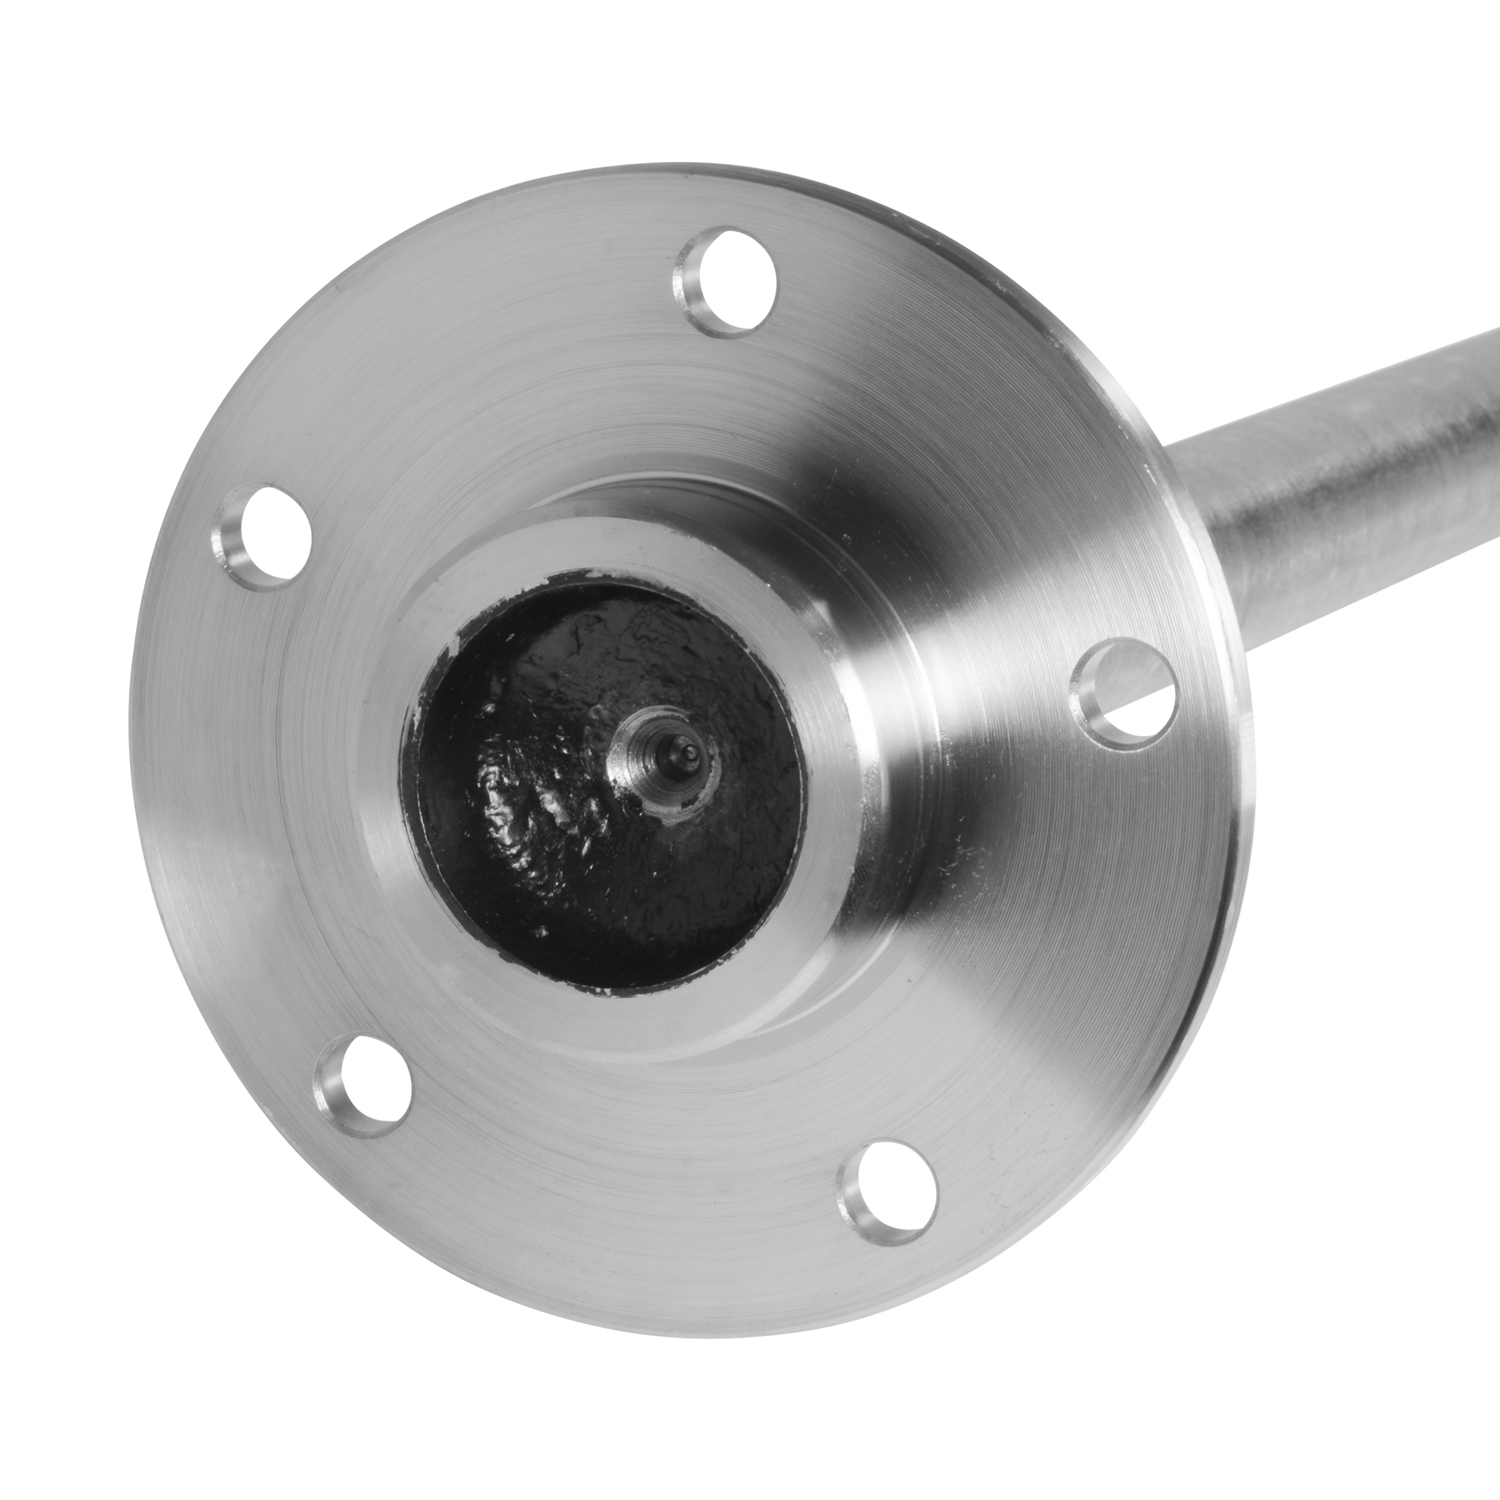 USA Standard axle shaft for '98-'02 Camaro, with electronic traction control.